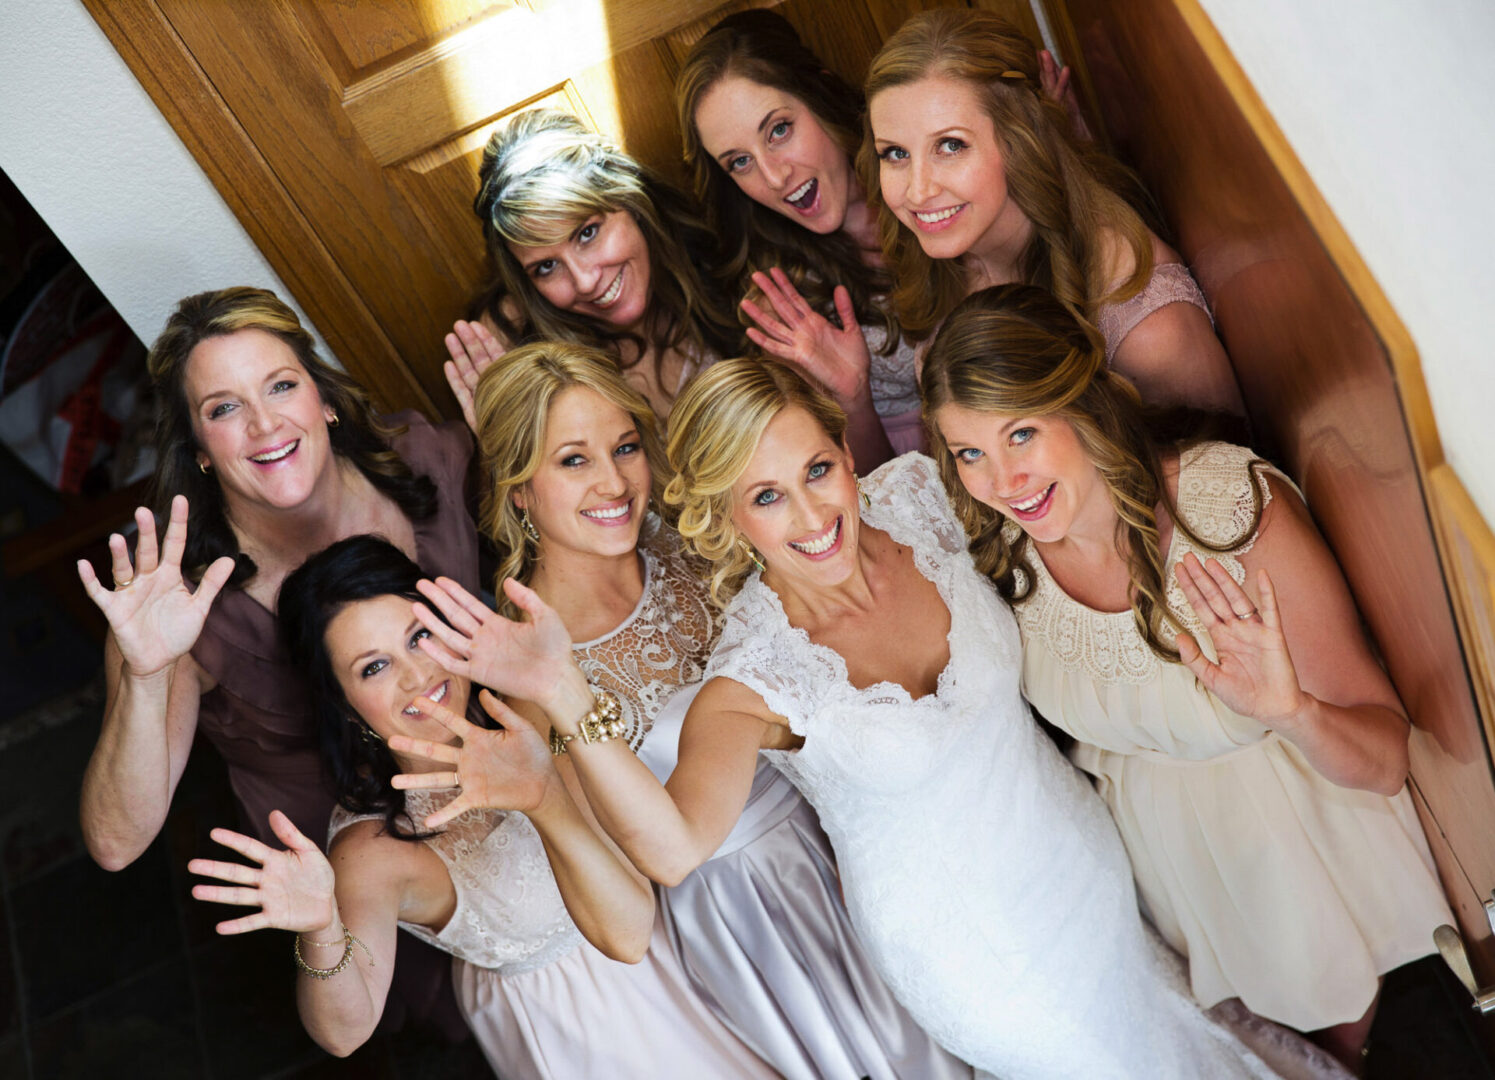 Top view of a bride with other girls